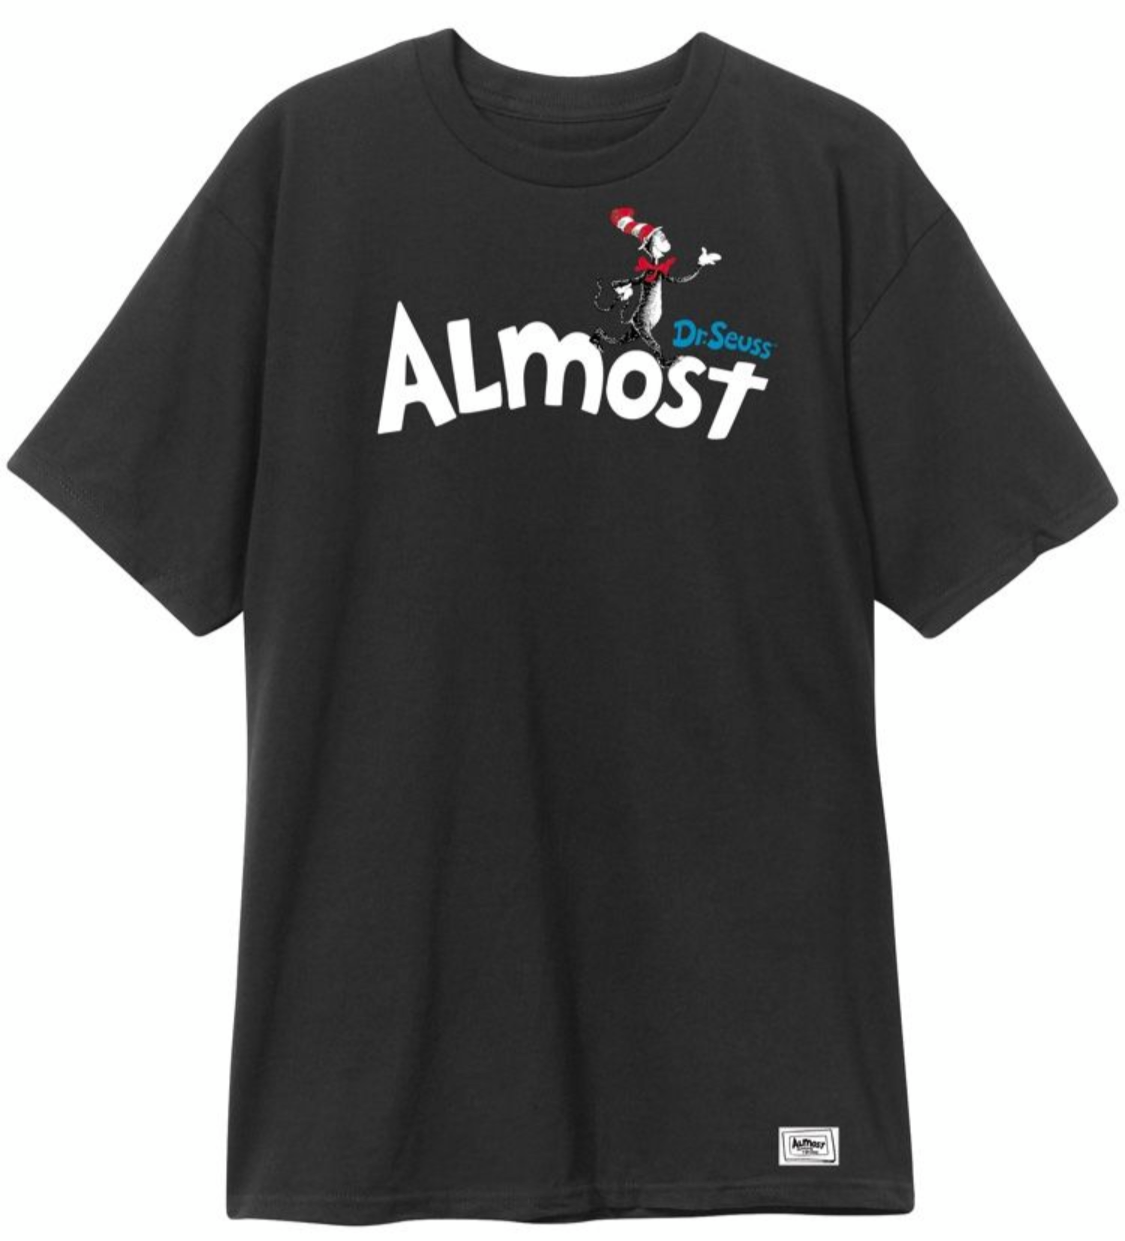 Almost - Dr. Almost Tee